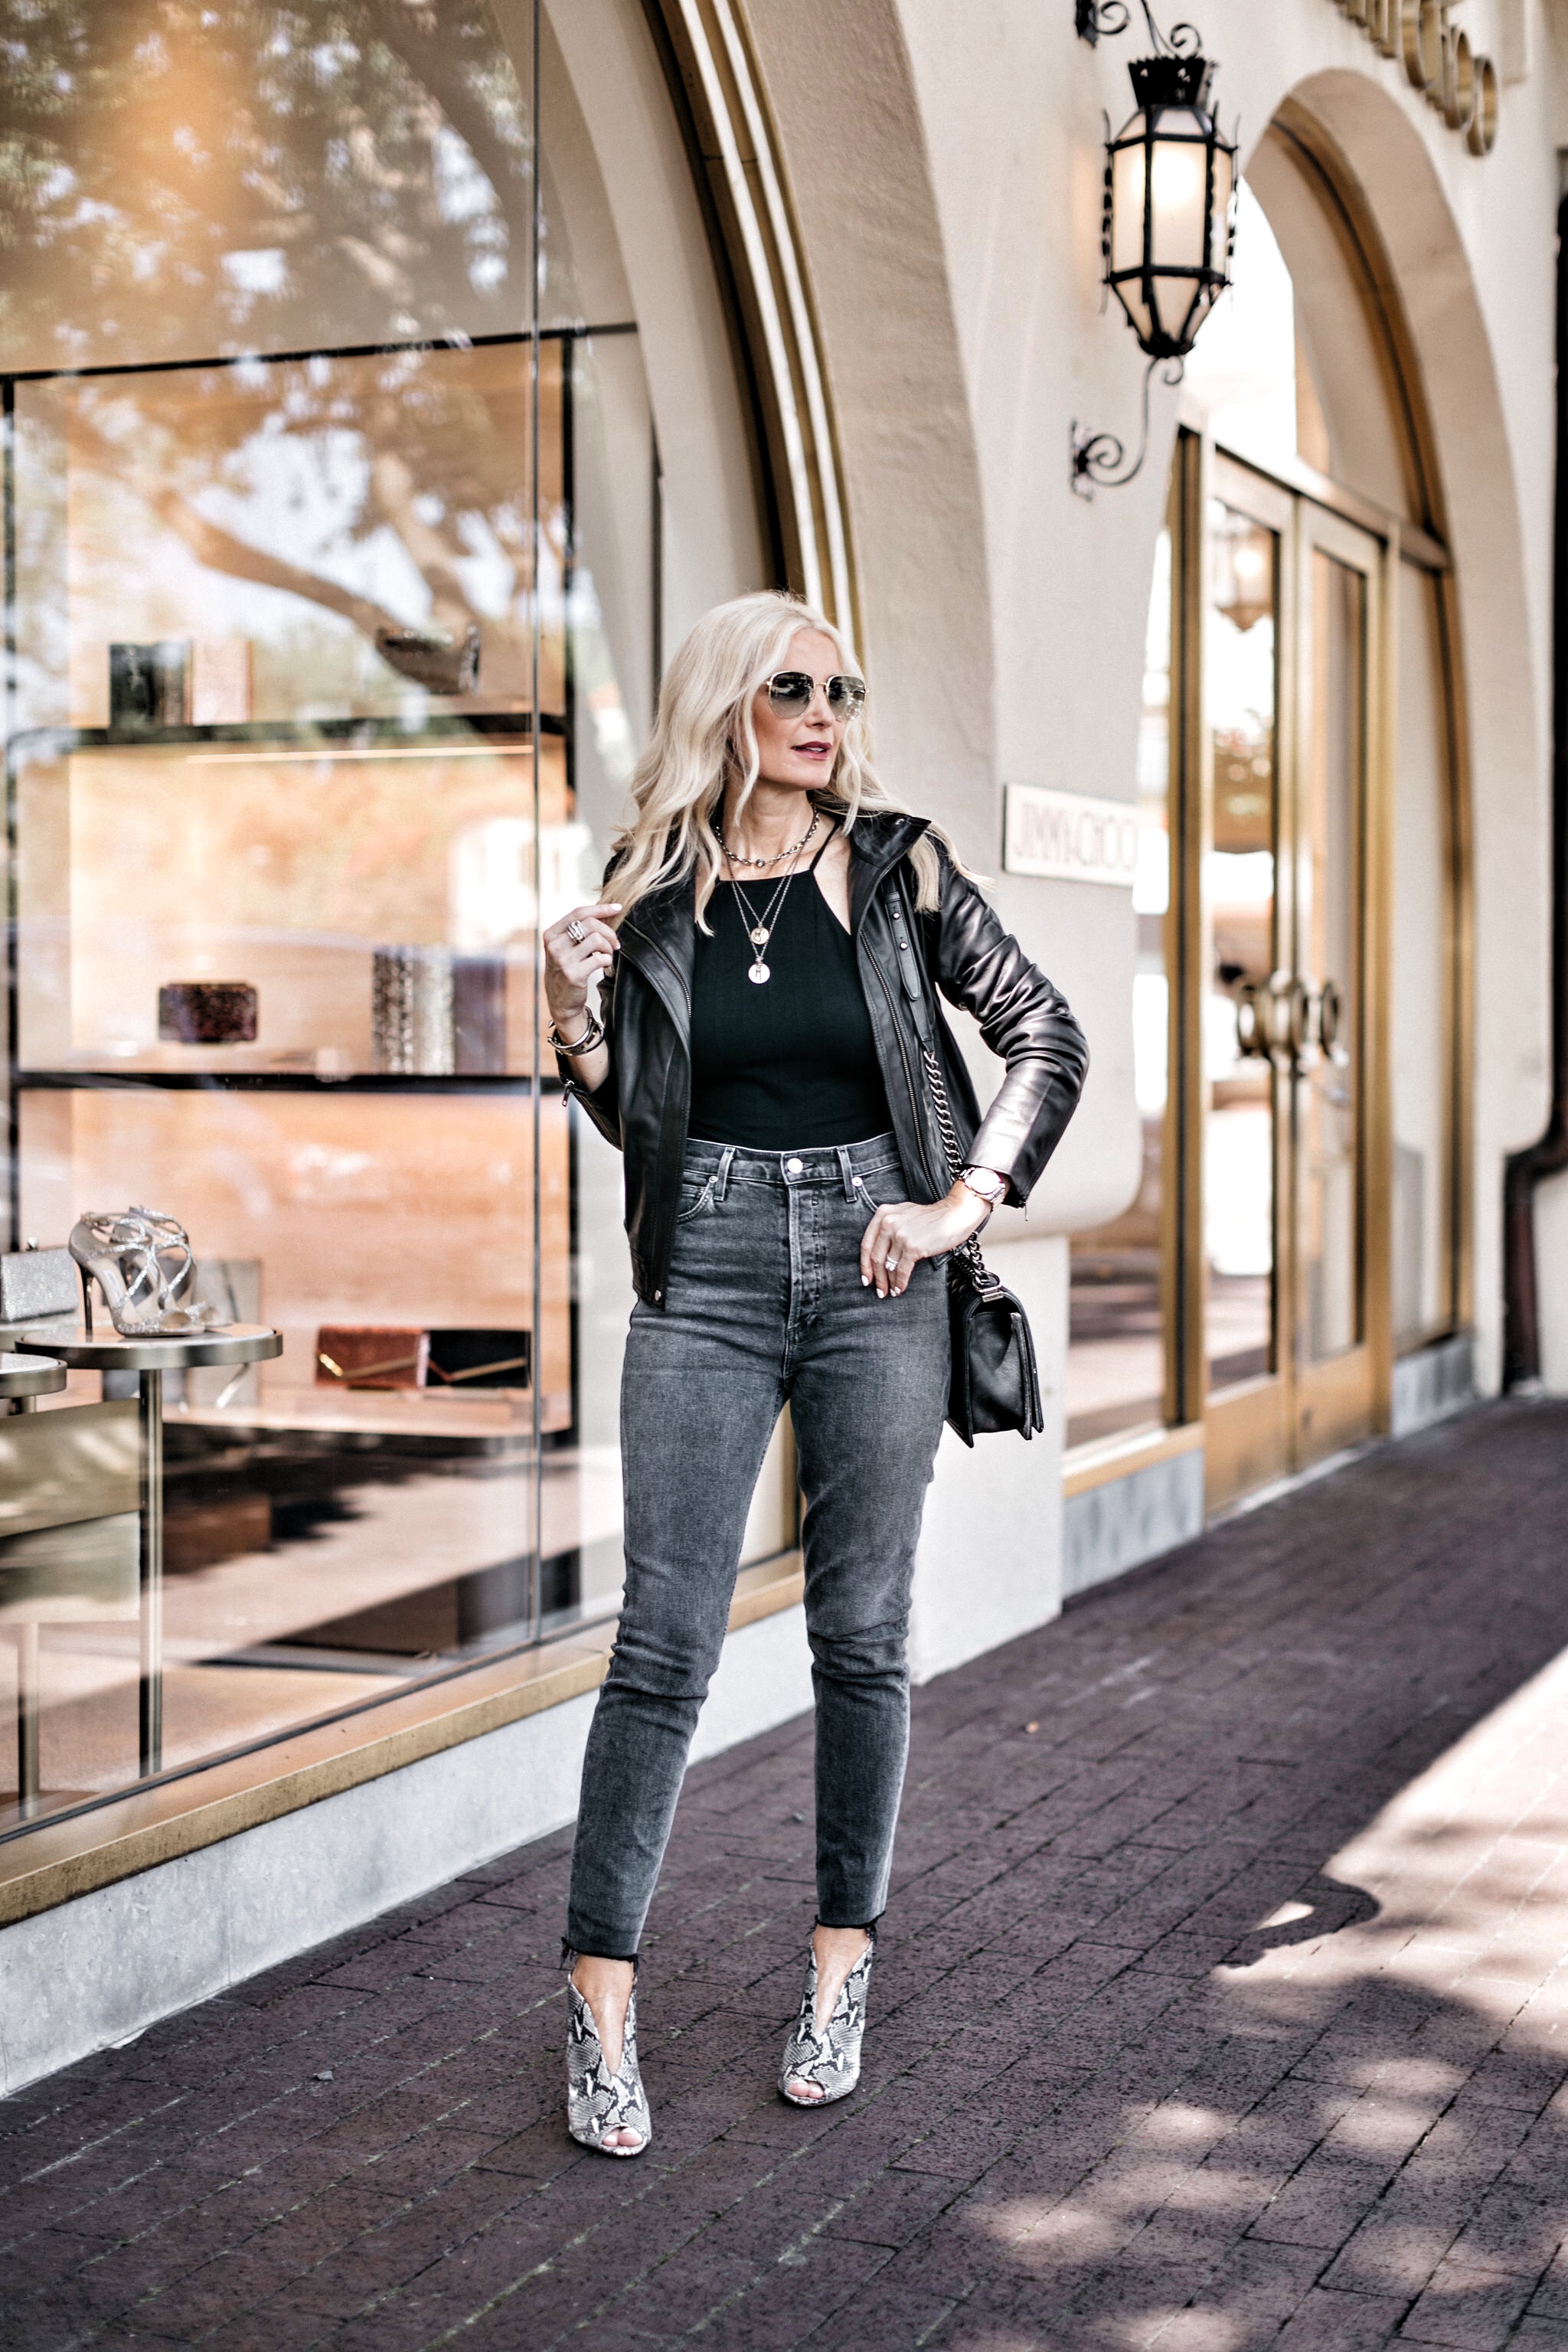 Leather Moto Jacket, Fashion blogger over 40 Erin Busbee of BusbeeStyle.com and Heather Anderson of SoHeather featuring the Chelsea28 black leather jacket from the Nordstrom Anniversary Sale 2019 in Dallas, Colorado